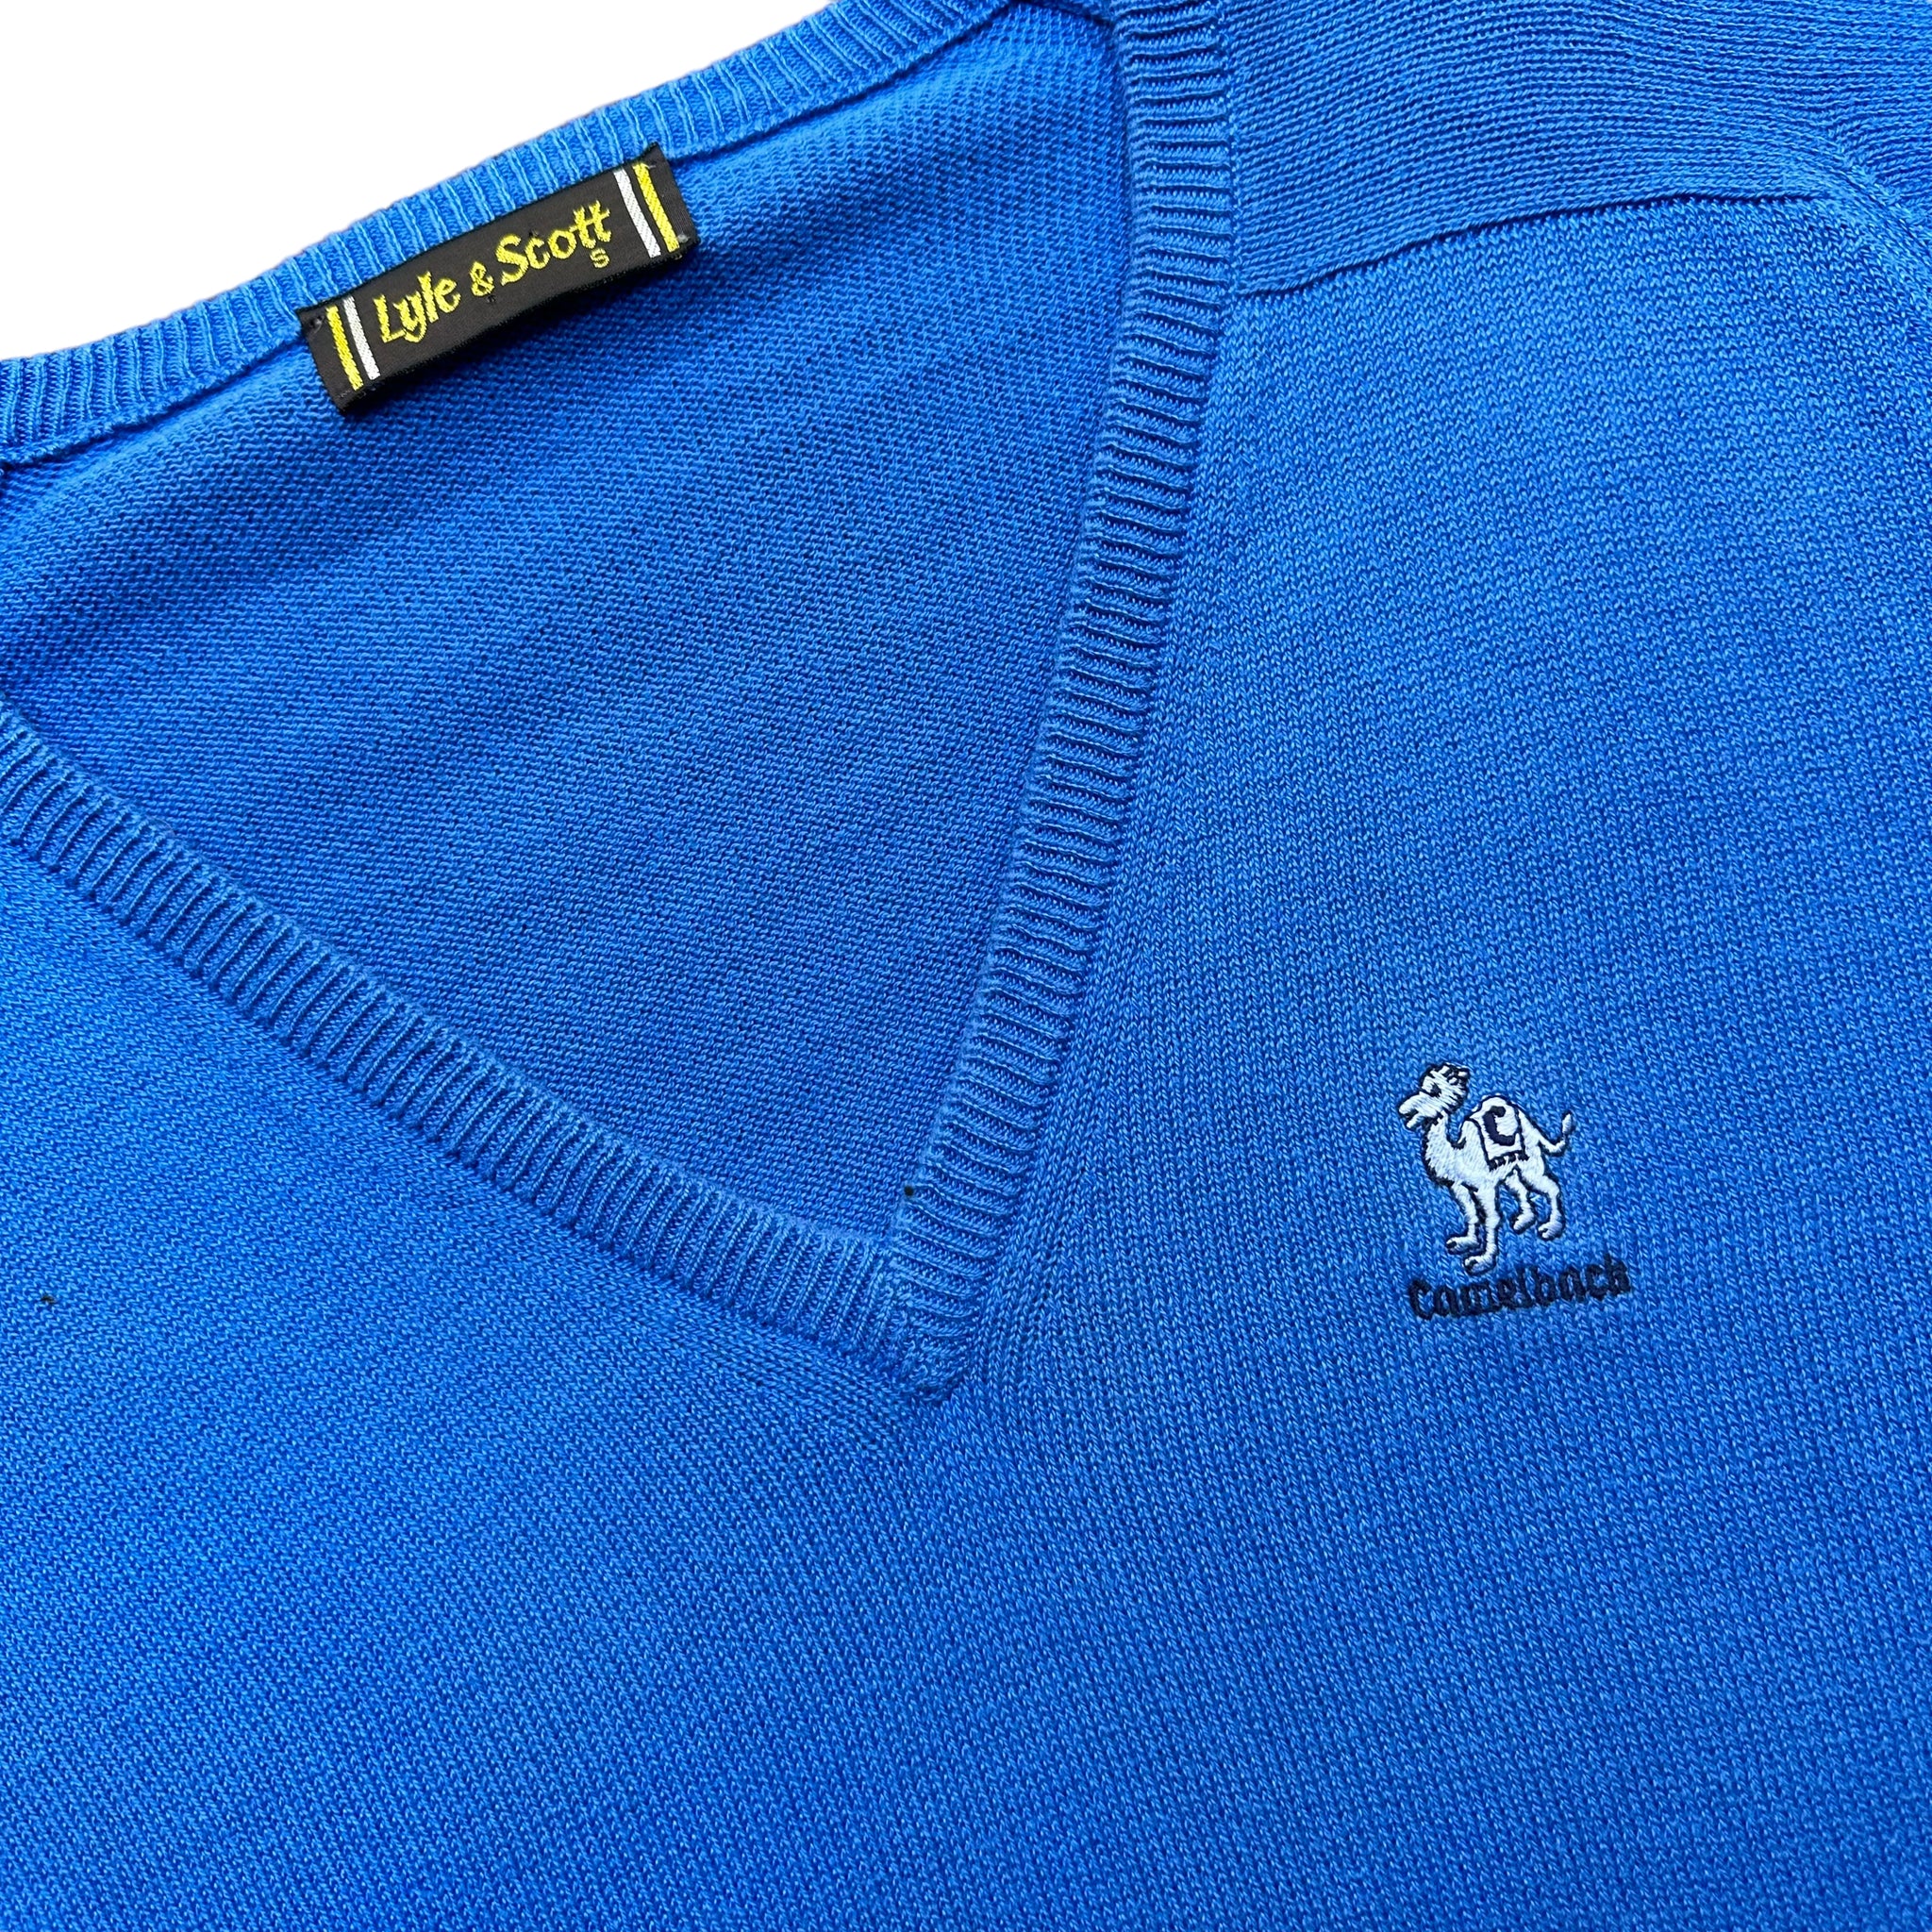 80s Camelback sweater Small